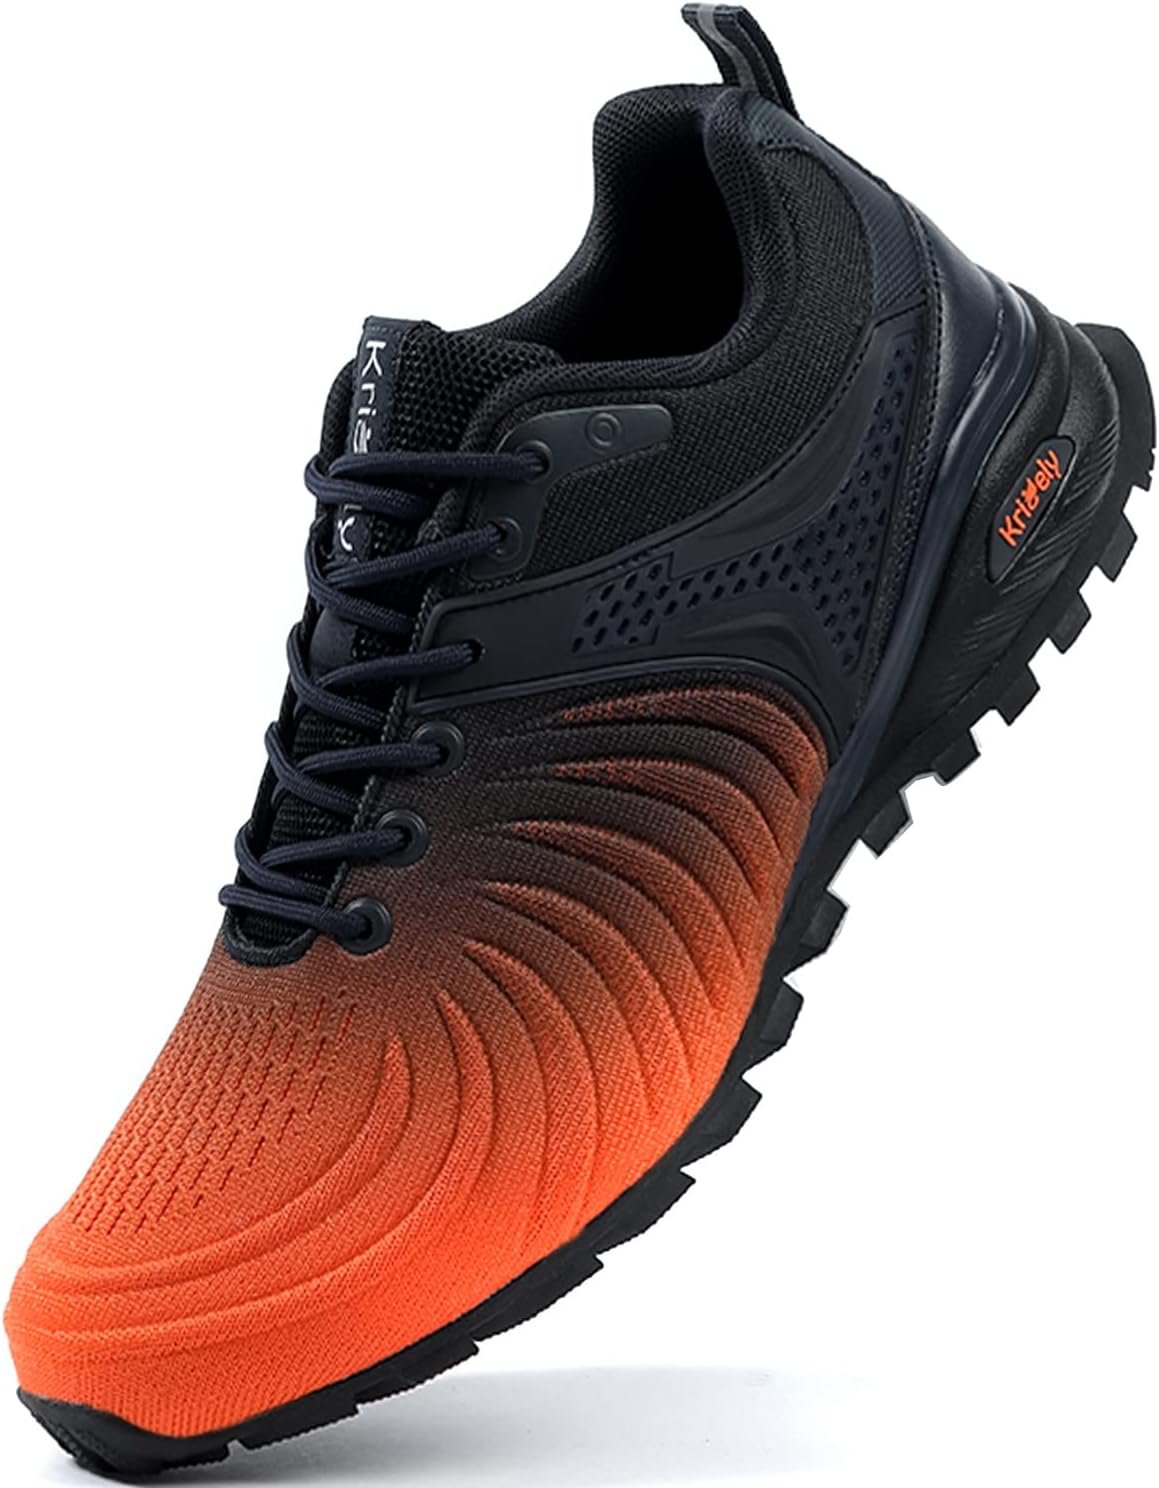 Kricely Men’s Walking Shoes Review post thumbnail image